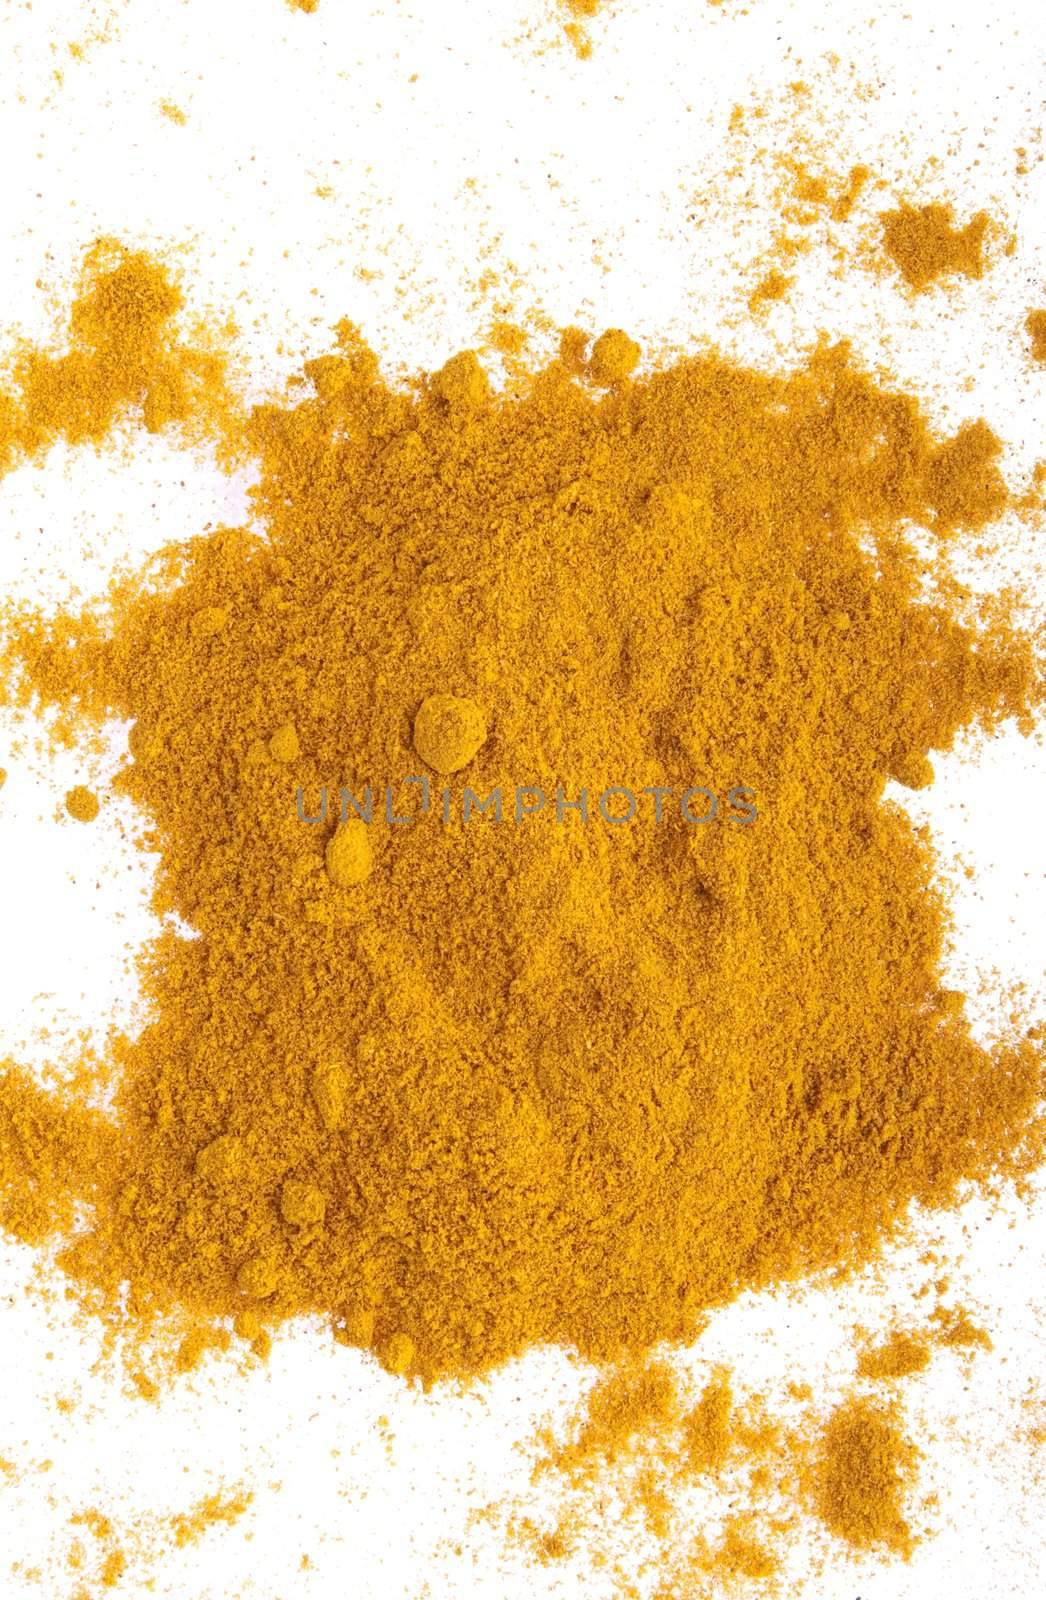 curry spice powder isolated on white background (chaotic version)